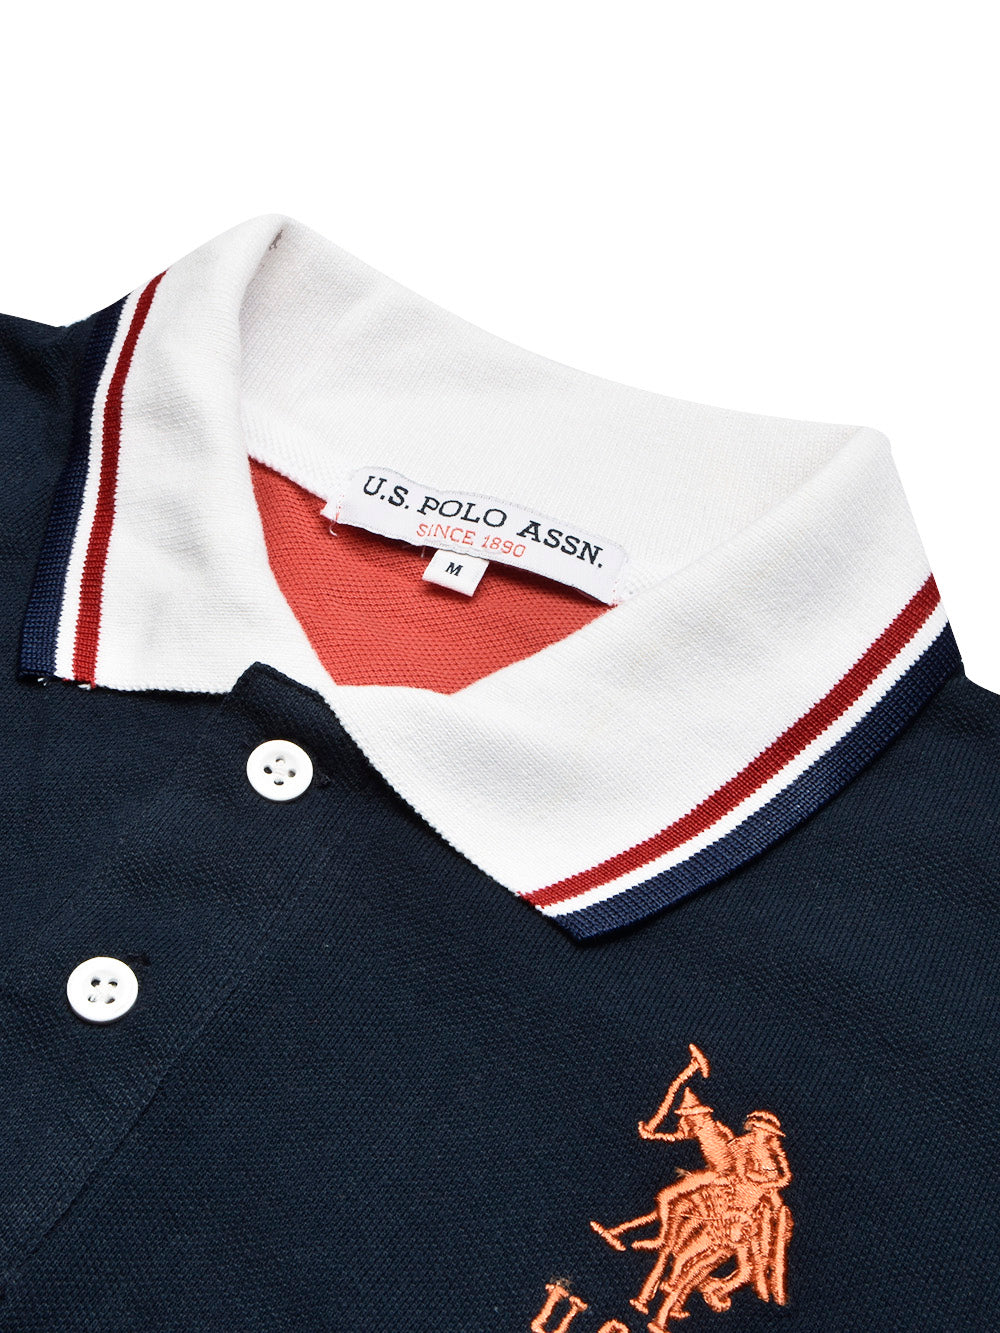 U.S Polo Assn. Summer Polo Shirt For Men-Navy with Coral Orange & White Panel-BE782/BR13029